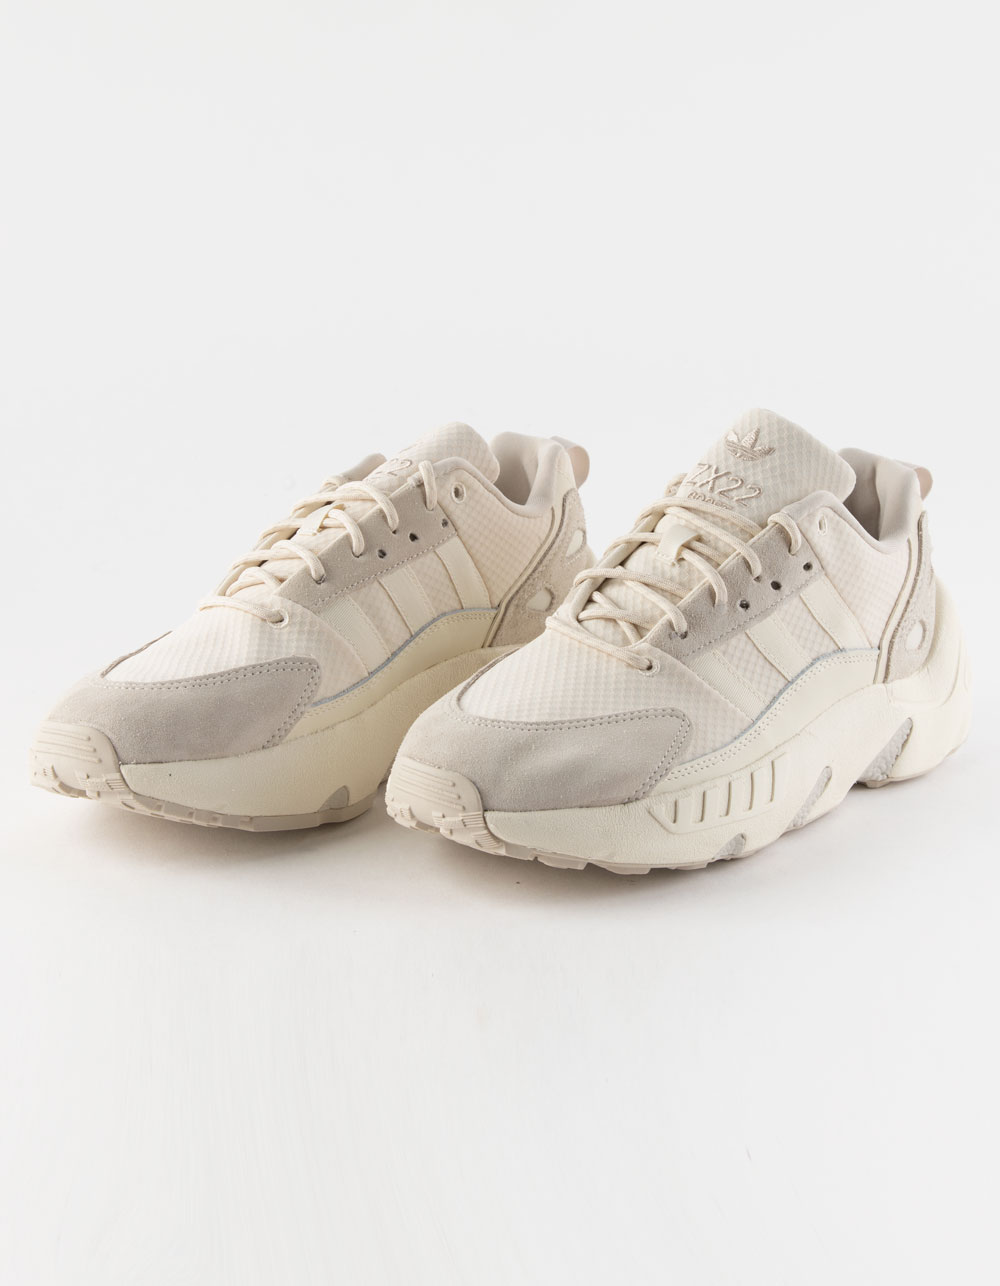 vocal Toxic fire ADIDAS ZX 22 Boost Mens Shoes - CREAM | Tillys